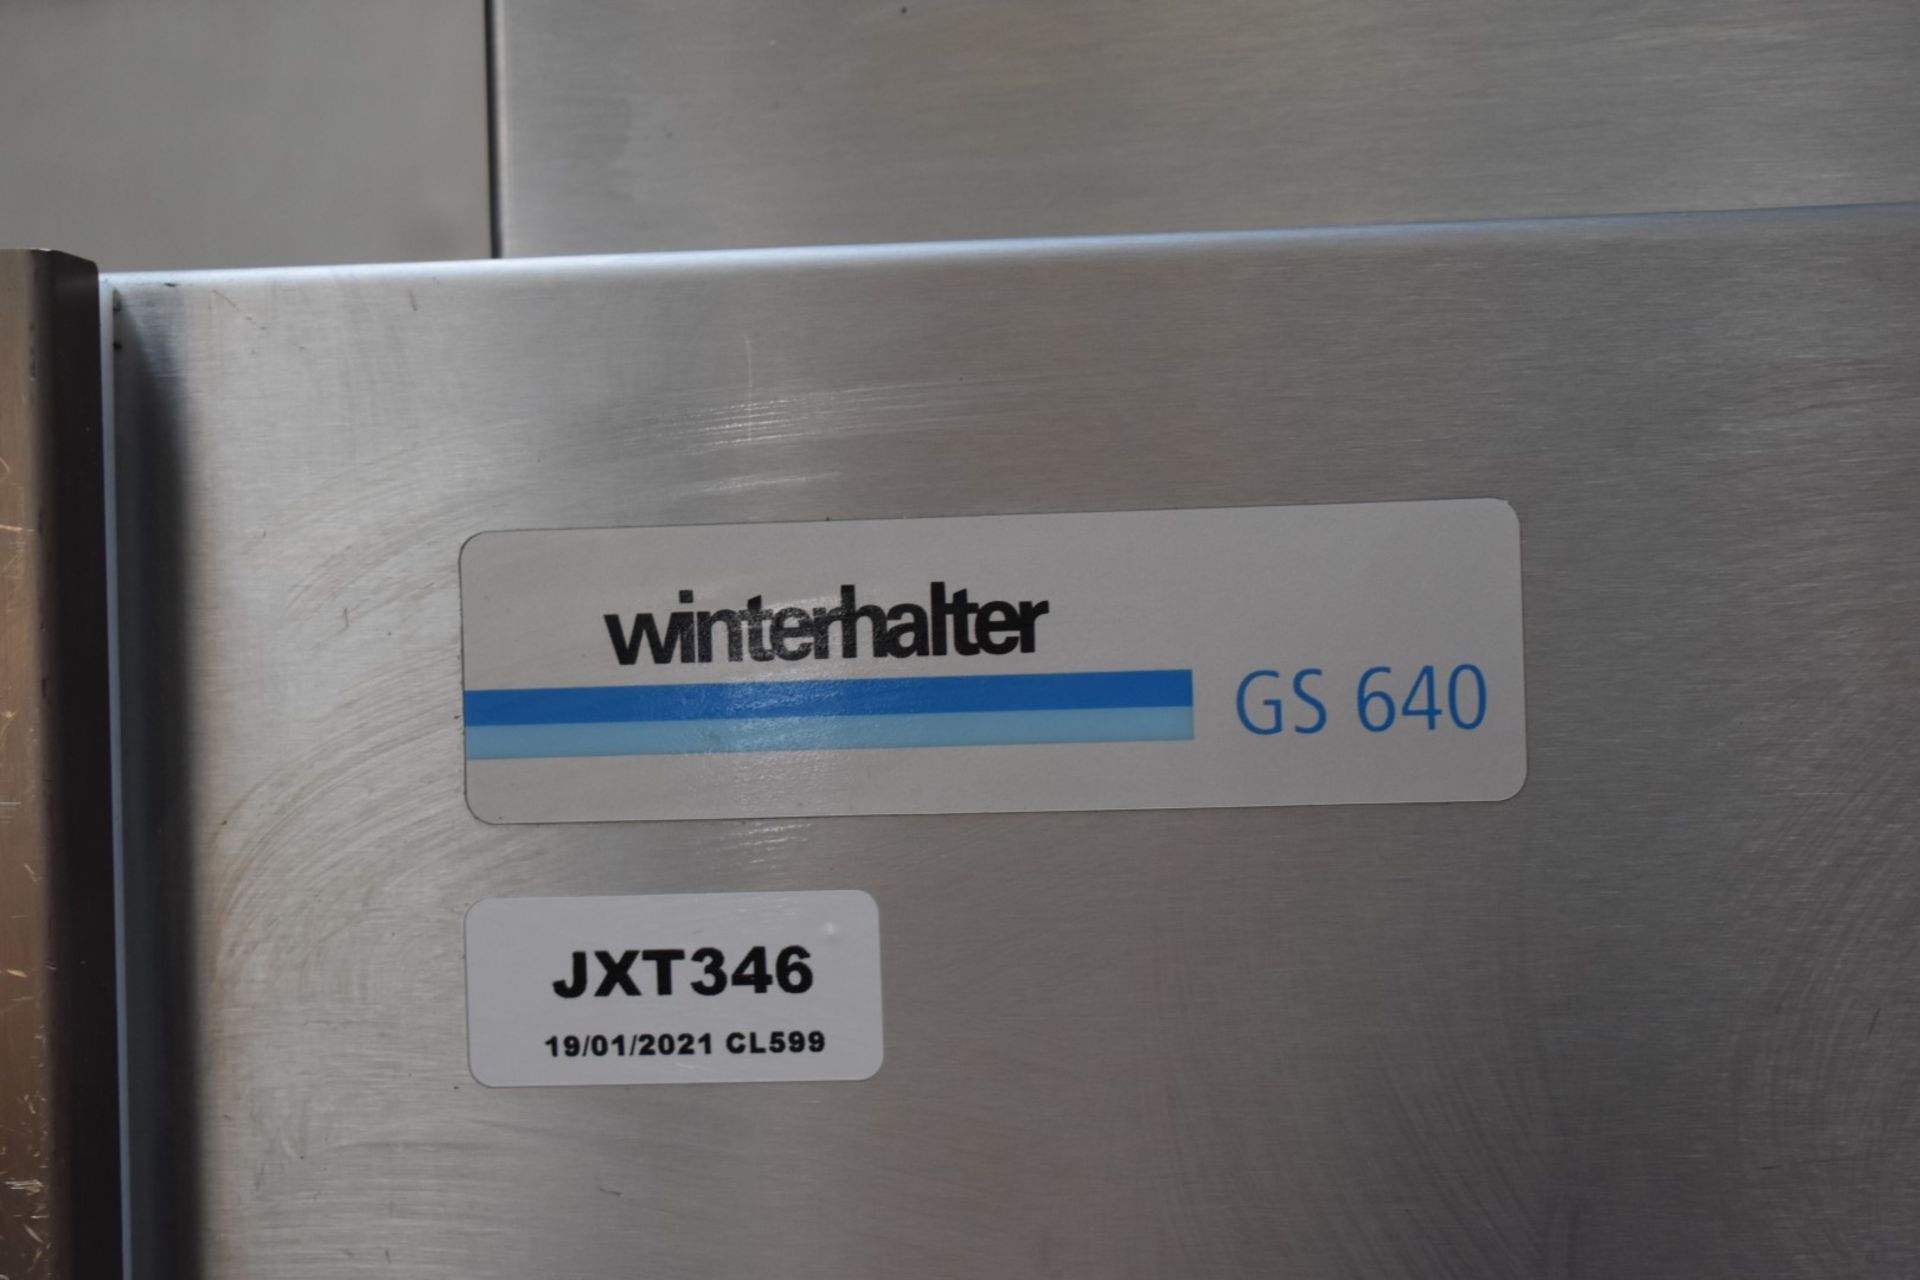 1 x Winterhalter GS640 Utensil Pot Washer - 3 Phase - Recently Removed From Major Supermarket Chain - Image 8 of 11